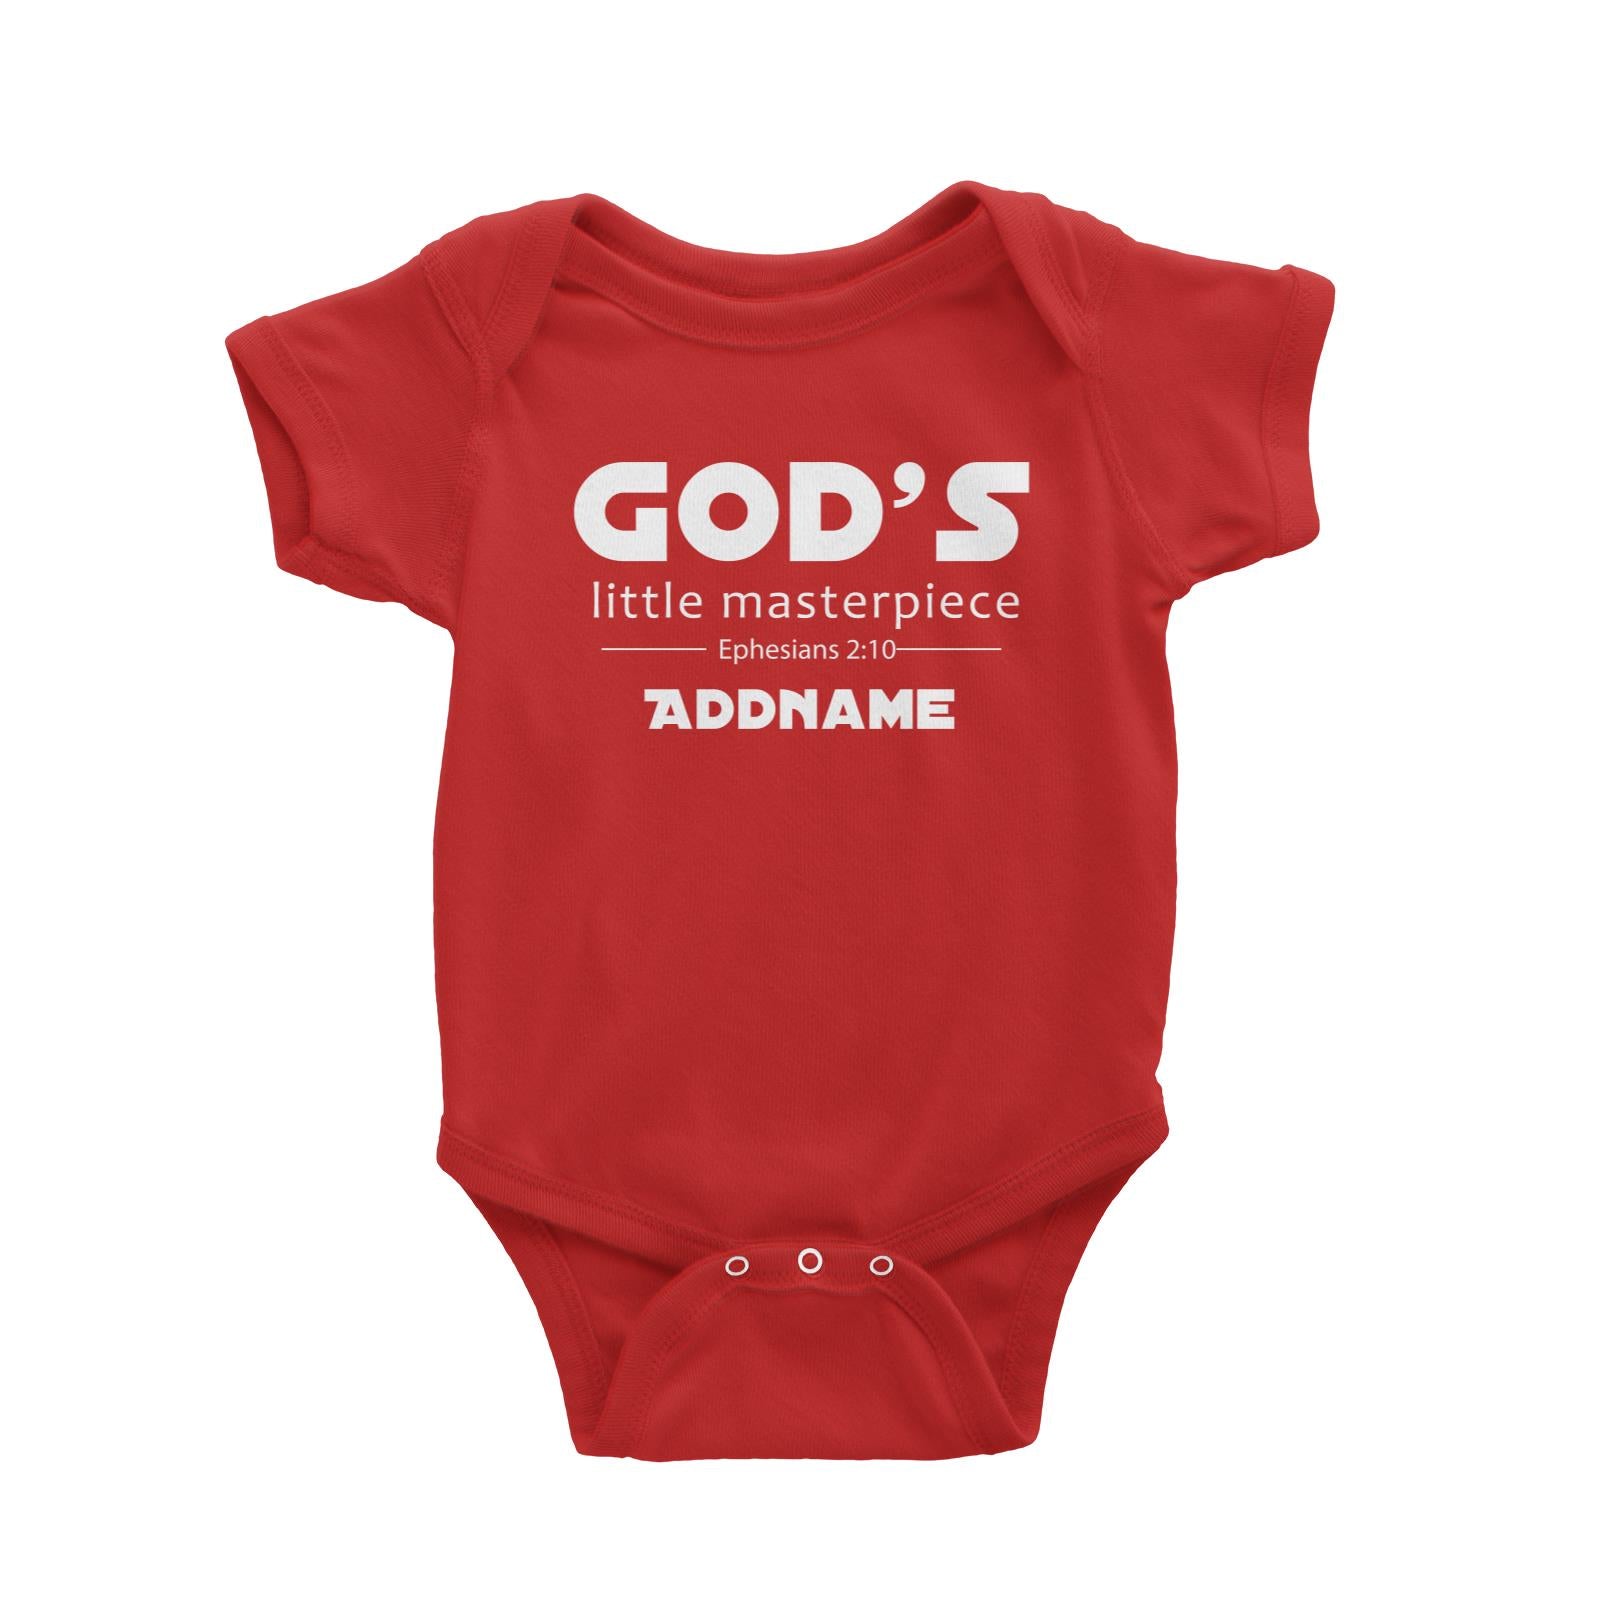 Christian Baby God's Little Masterpiece Ephesians 2.10 Addname Baby Romper